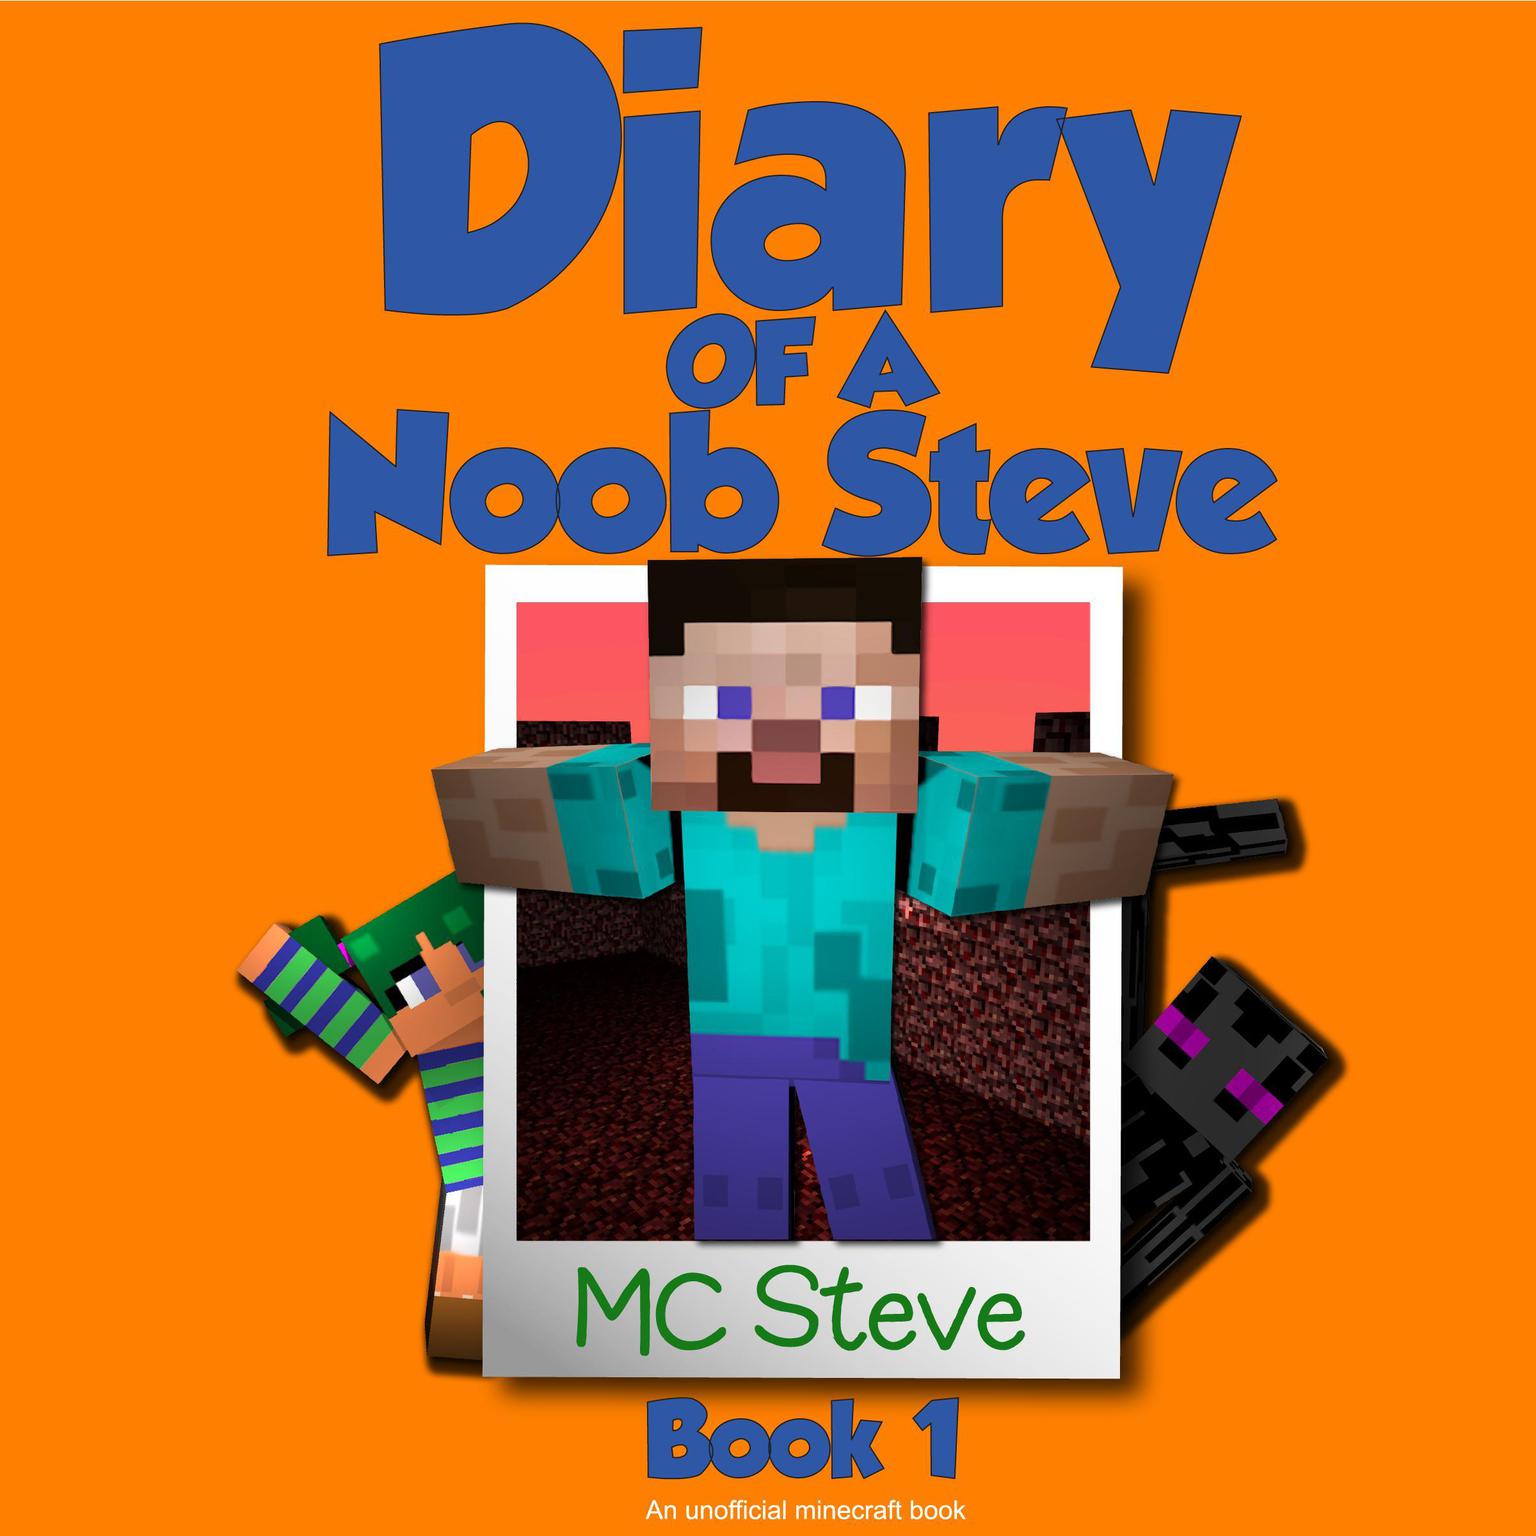 Minecraft: Diary of a Minecraft Noob Steve Book 1: Mysterious Fires (An Unofficial Minecraft Diary Book): An Unofficial Minecraft Diary Book Audiobook, by MC Steve